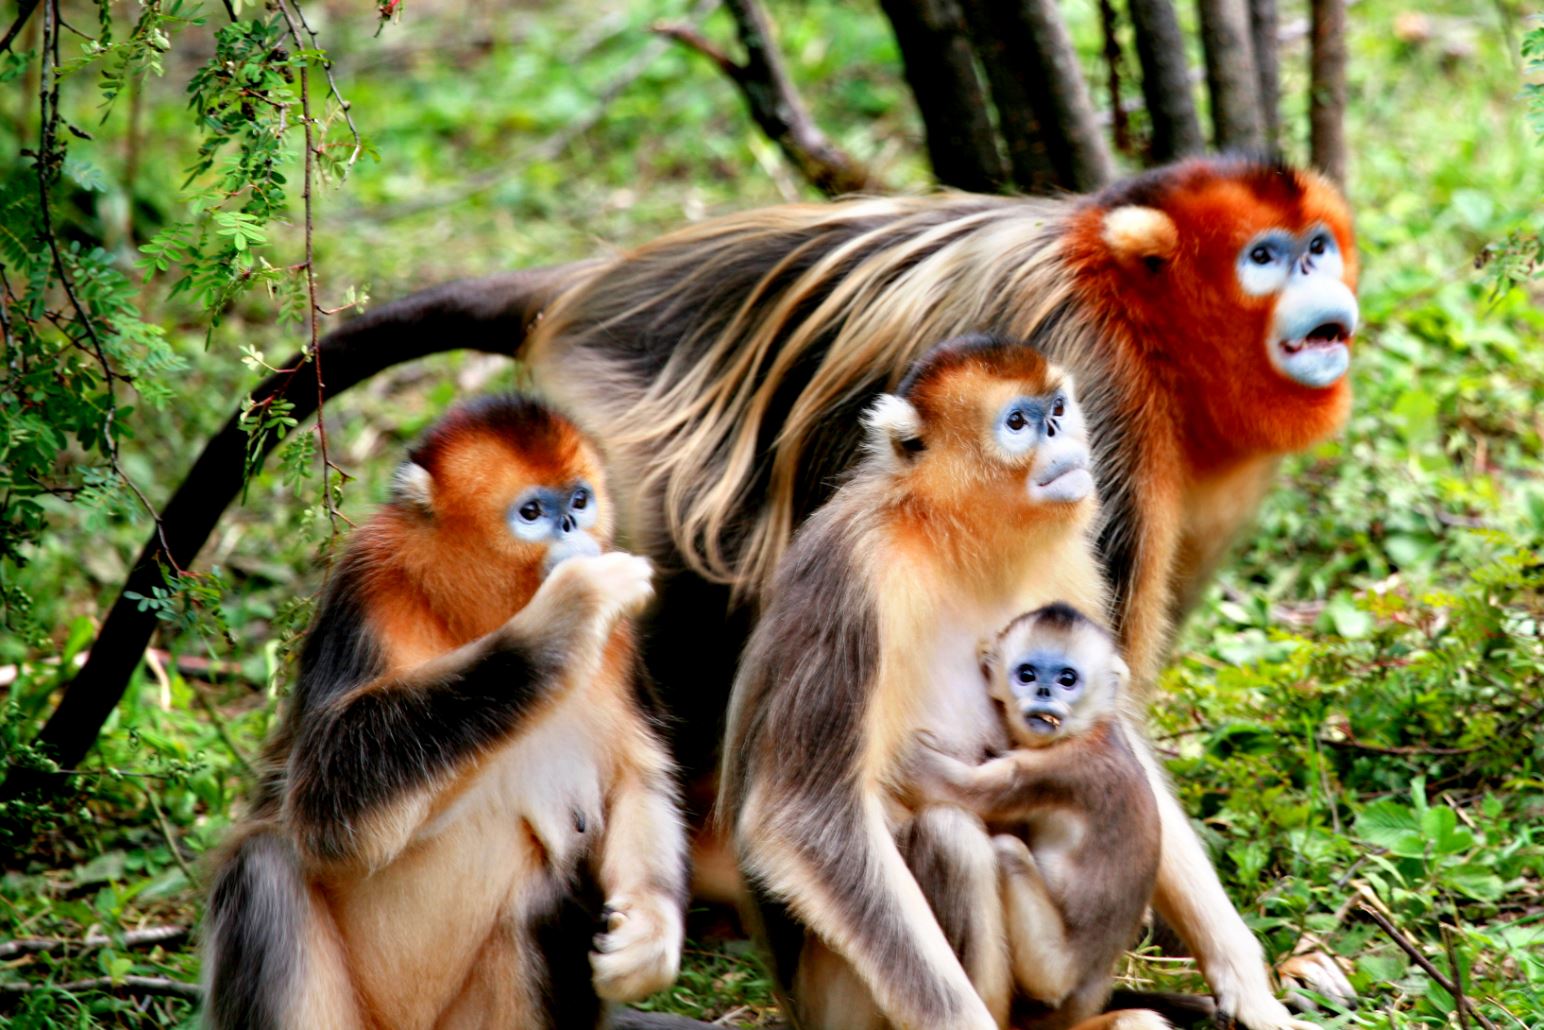 Shennongjia National Nature Reserve protects the largest primary forests remaining in Central China and provides habitat for many rare animal species, including the golden snub-nosed monkey